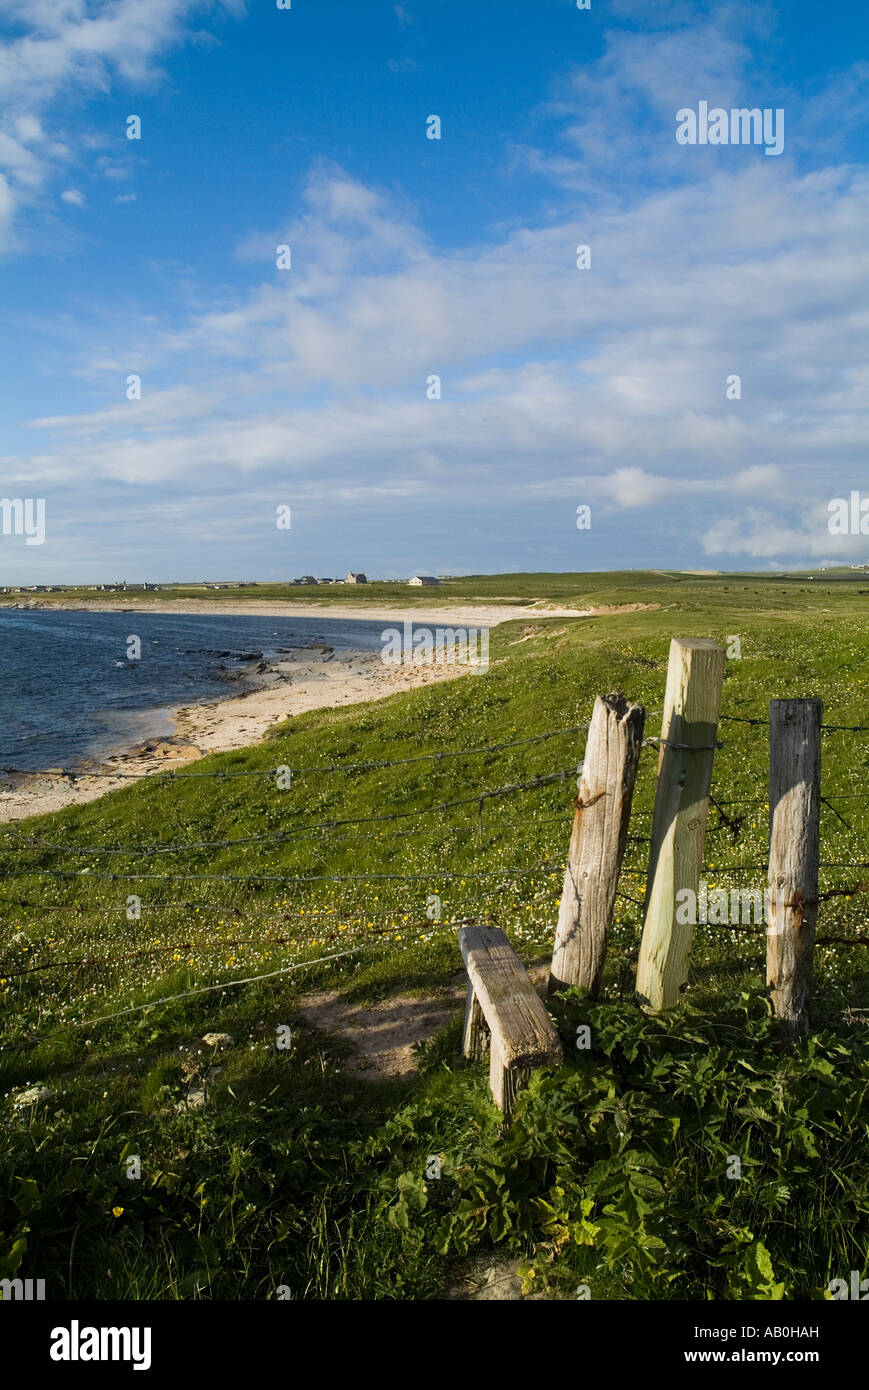 dh Birsay Bay BIRSAY ORKNEY Wooden footpath stile overlooking beach white clouds and blue sky Stock Photo